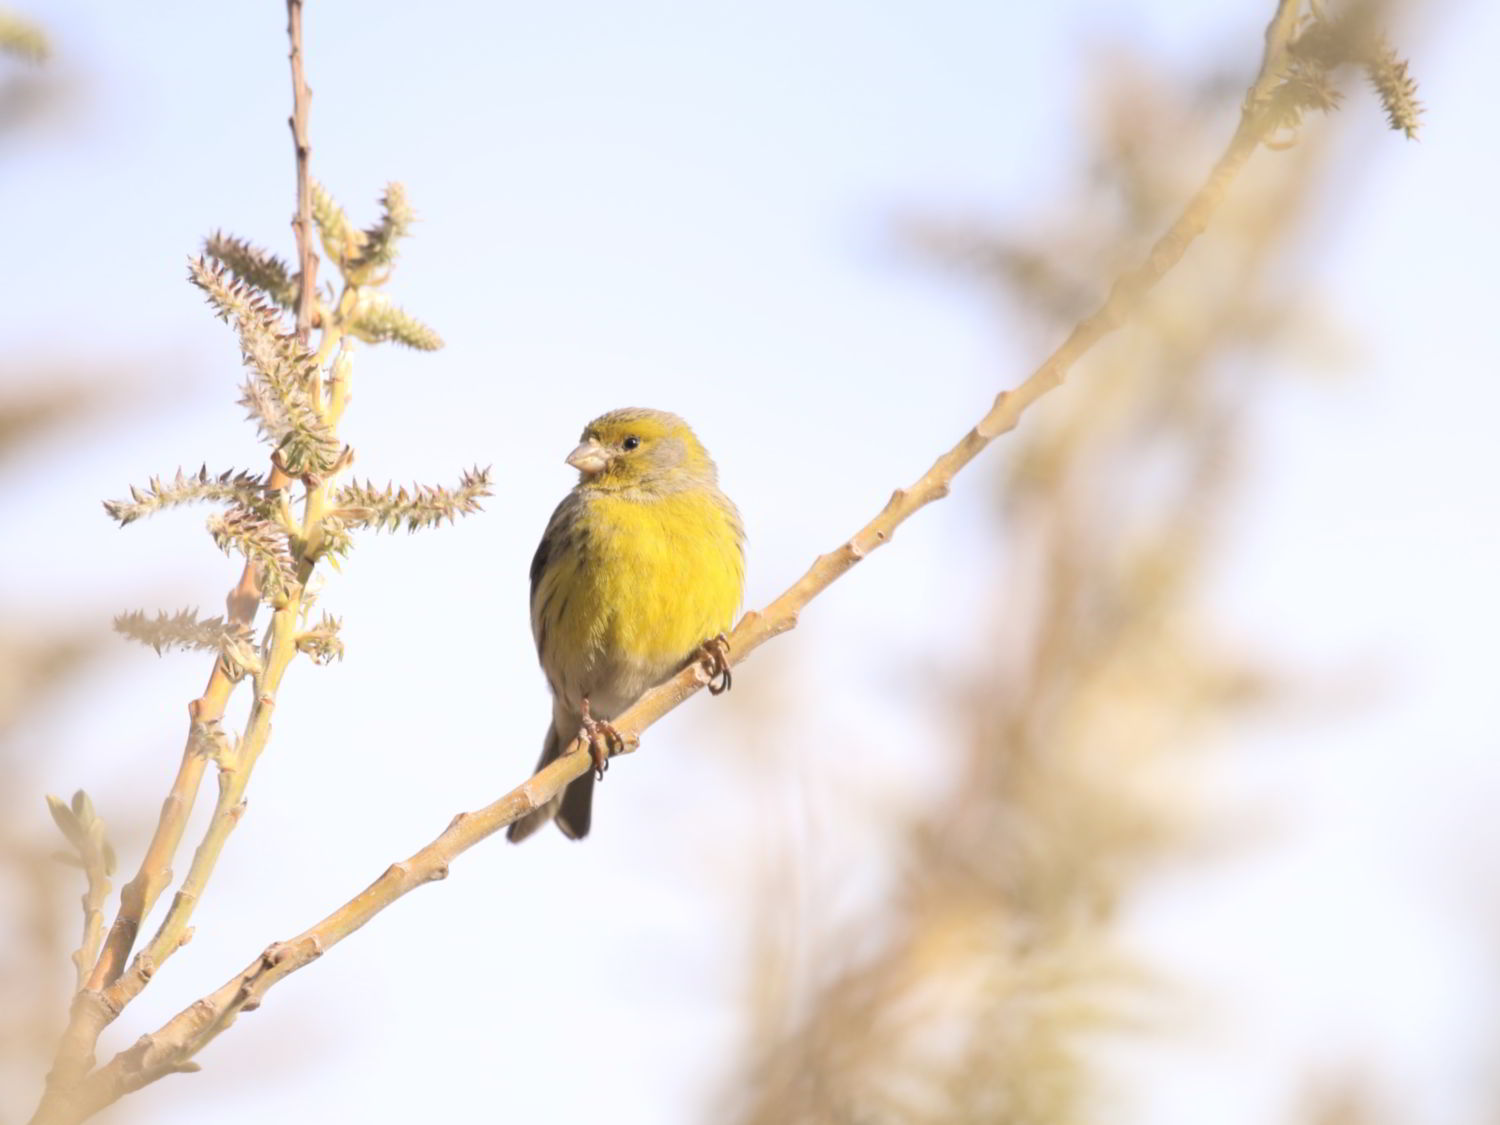 Atlantic Canary perched on a branch